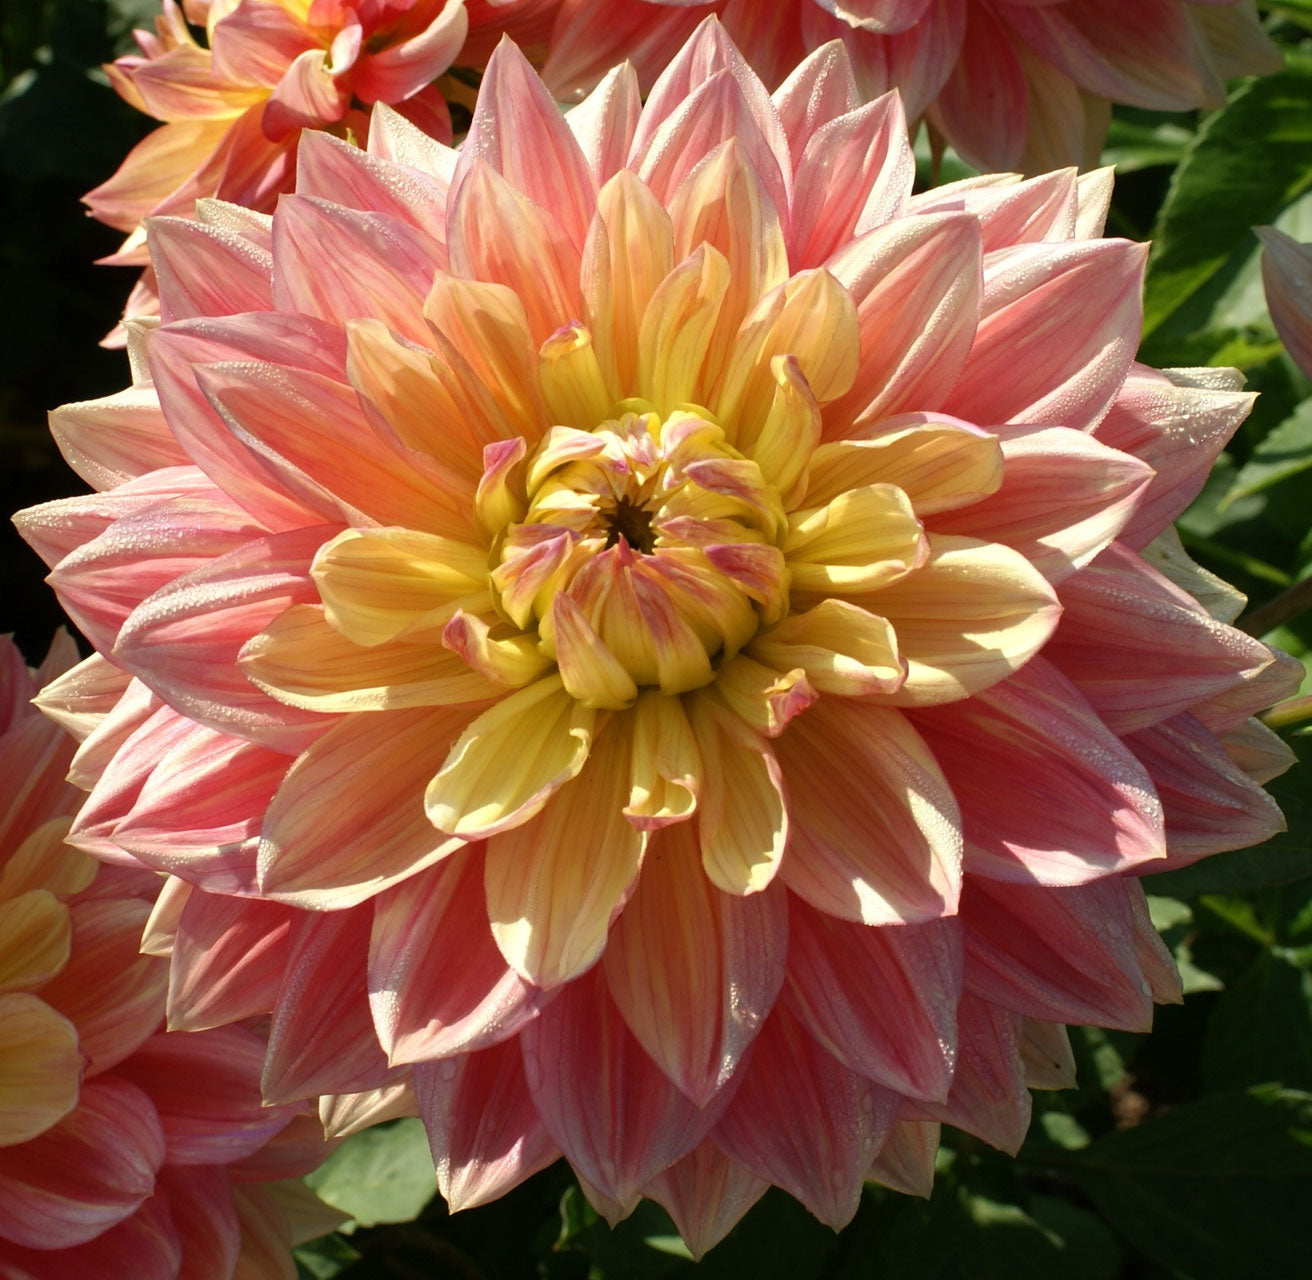 A dinnerplate-sized beauty sporting salmon, pink, hint of orange with a yellow heart, dahlia Wanda's Aurora will stop you in your tracks. She is a big, bold, cheerful flower and a customer favourite! Buy dahlia tubers online www.lilysgardenstore.com